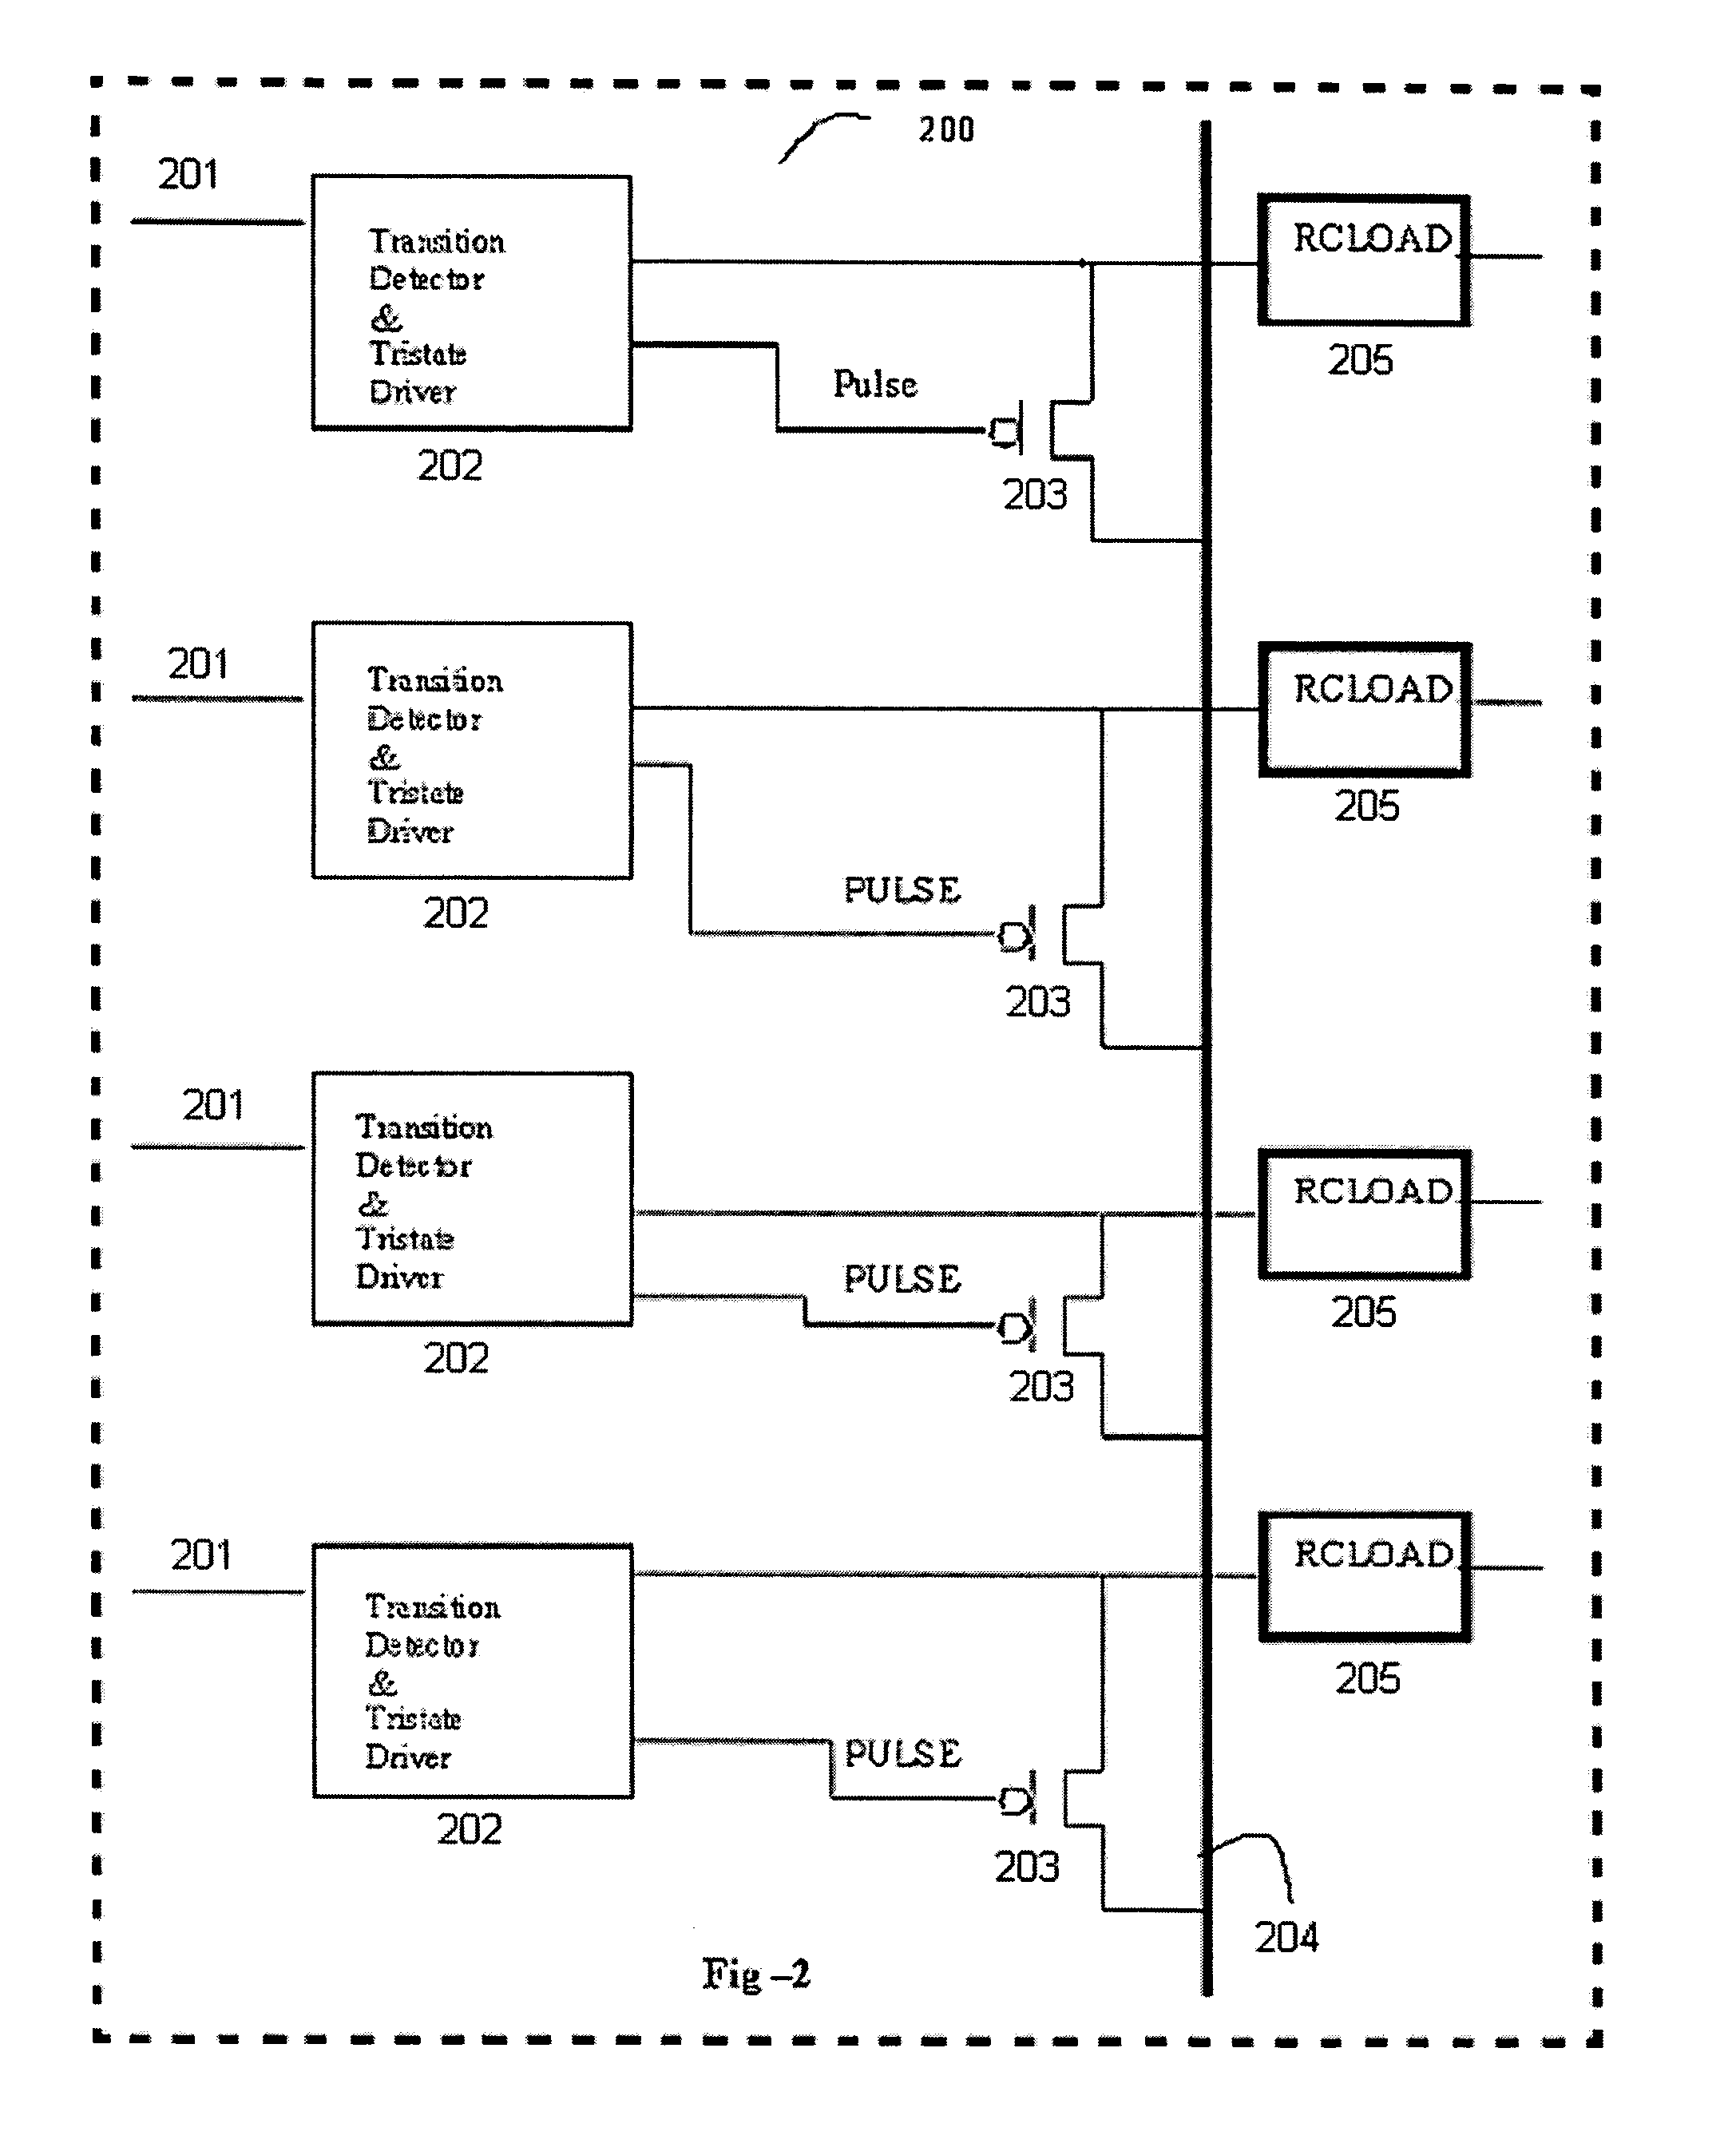 Method and system for reducing power consumption in digital circuitry using charge redistribution circuits